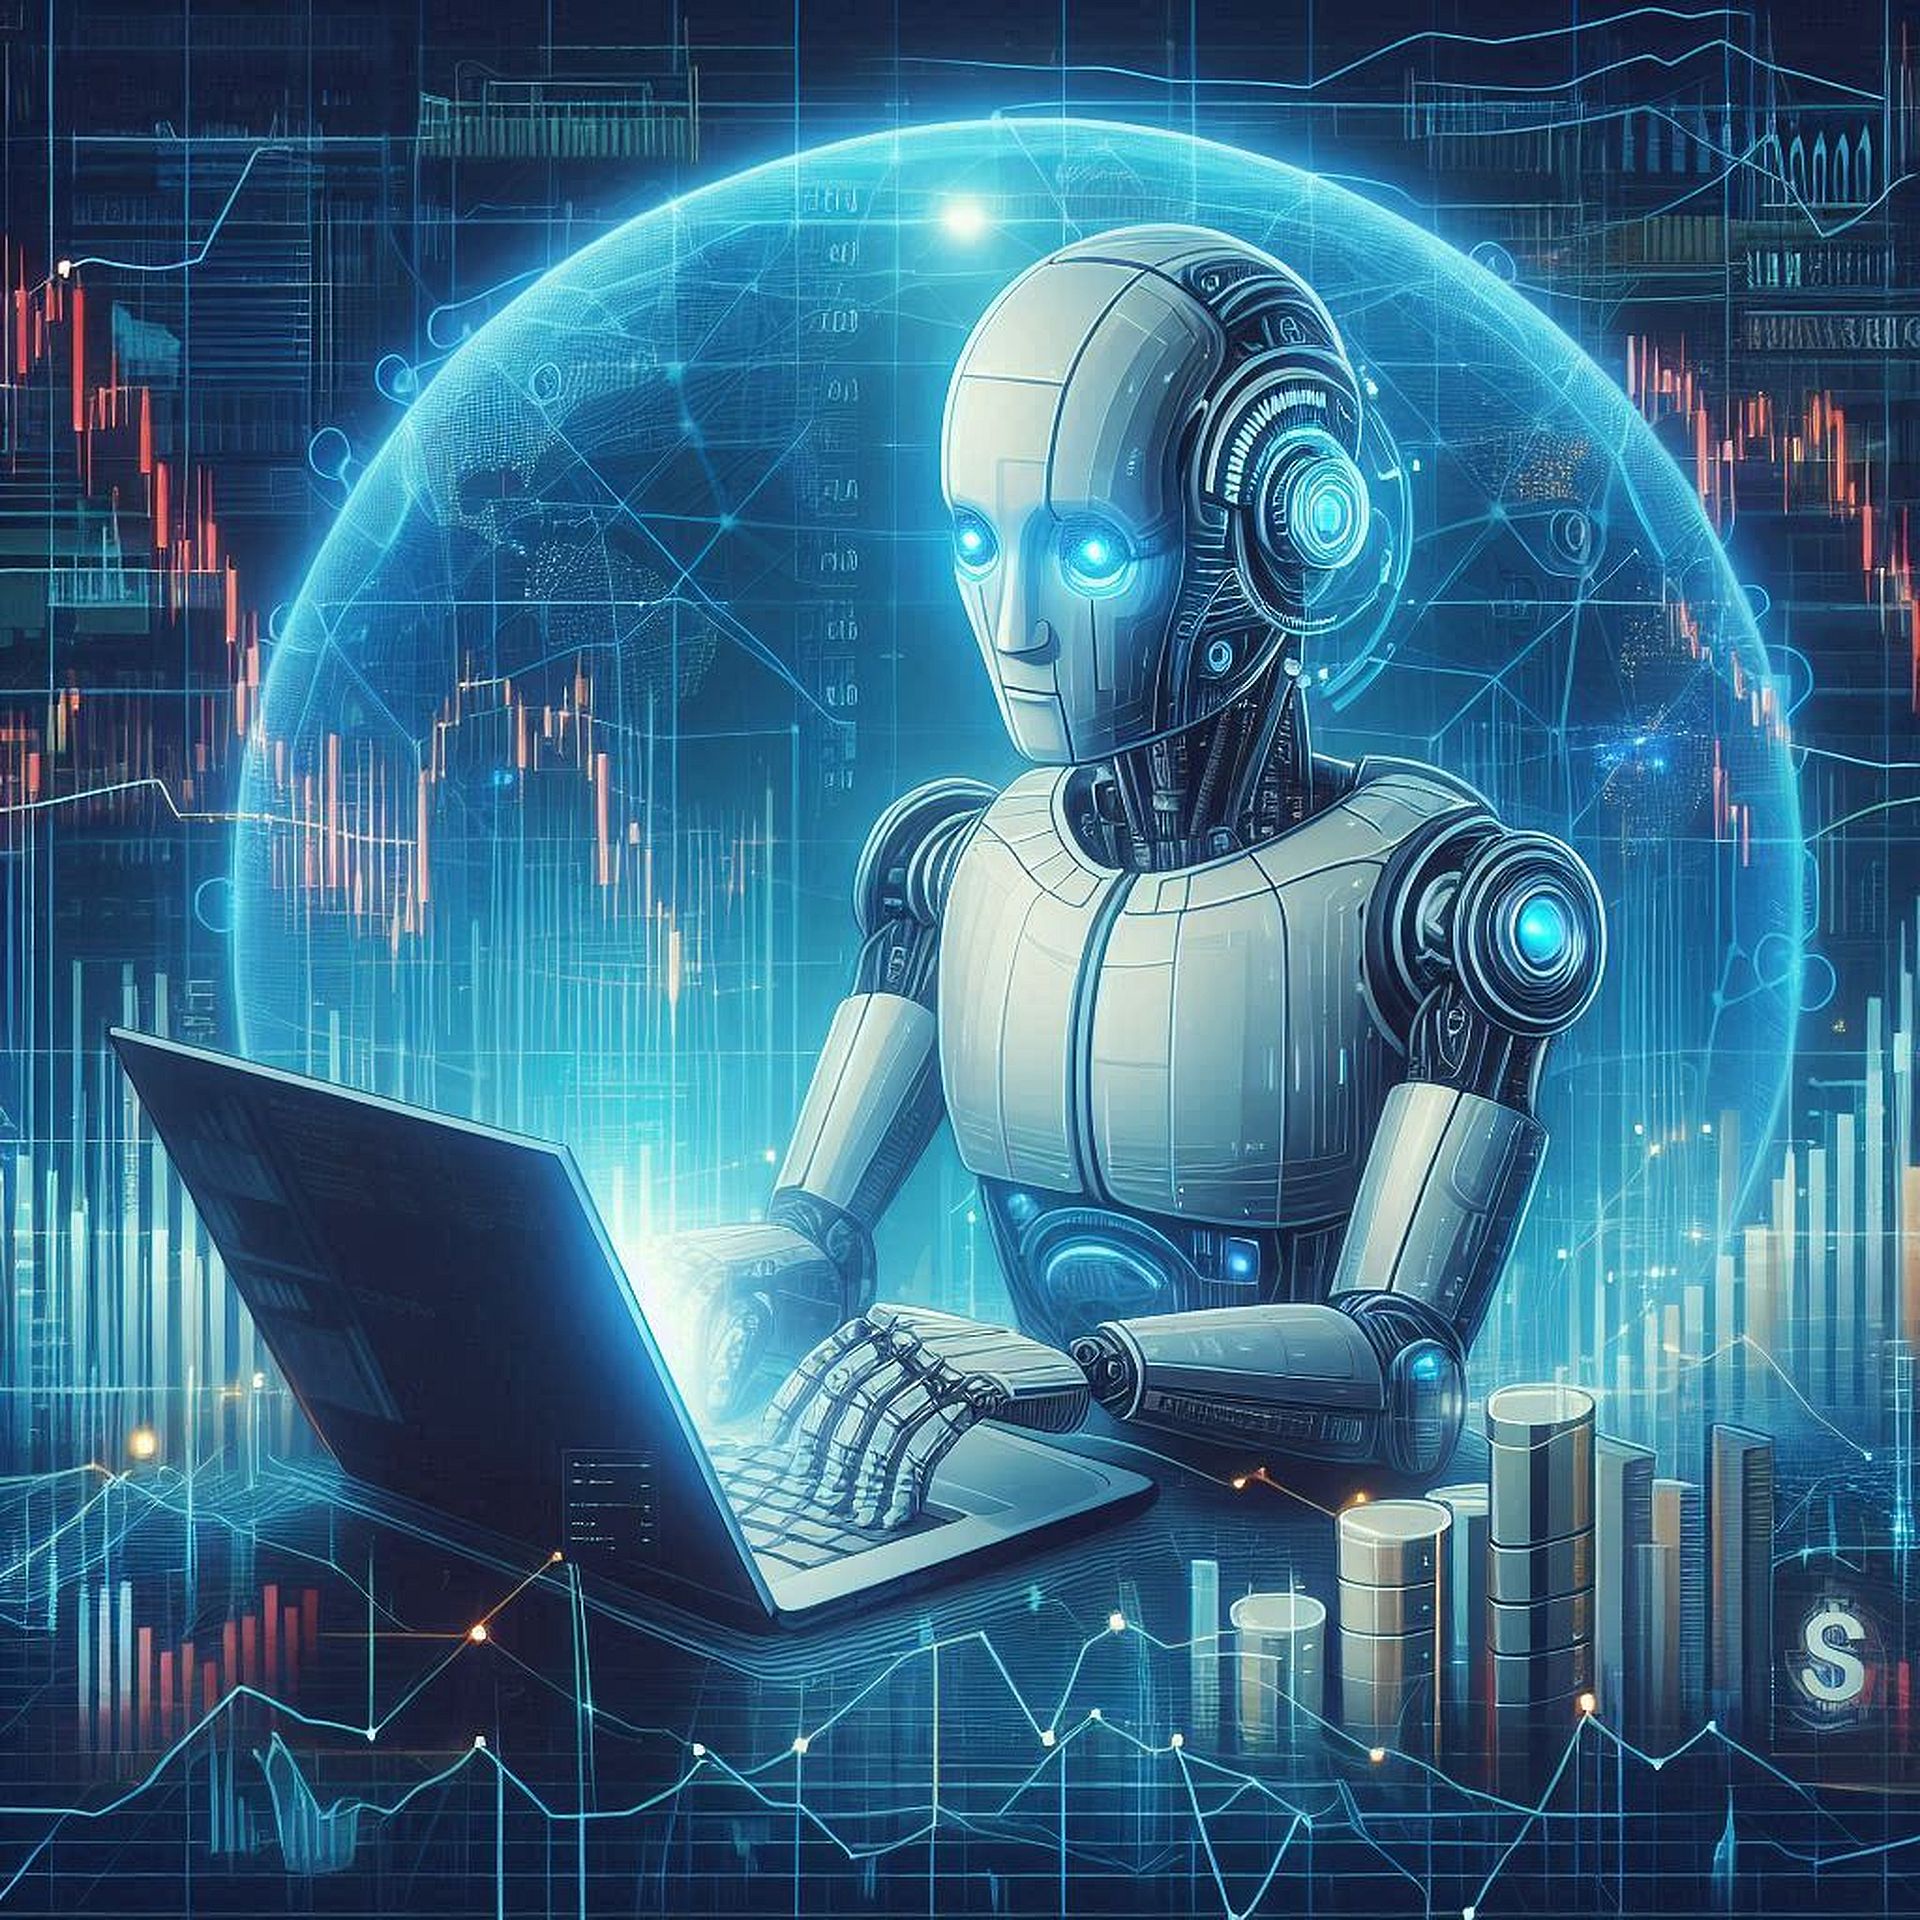 In-depth analysis: Traders Union explors AI investment with ChatGPT stocks